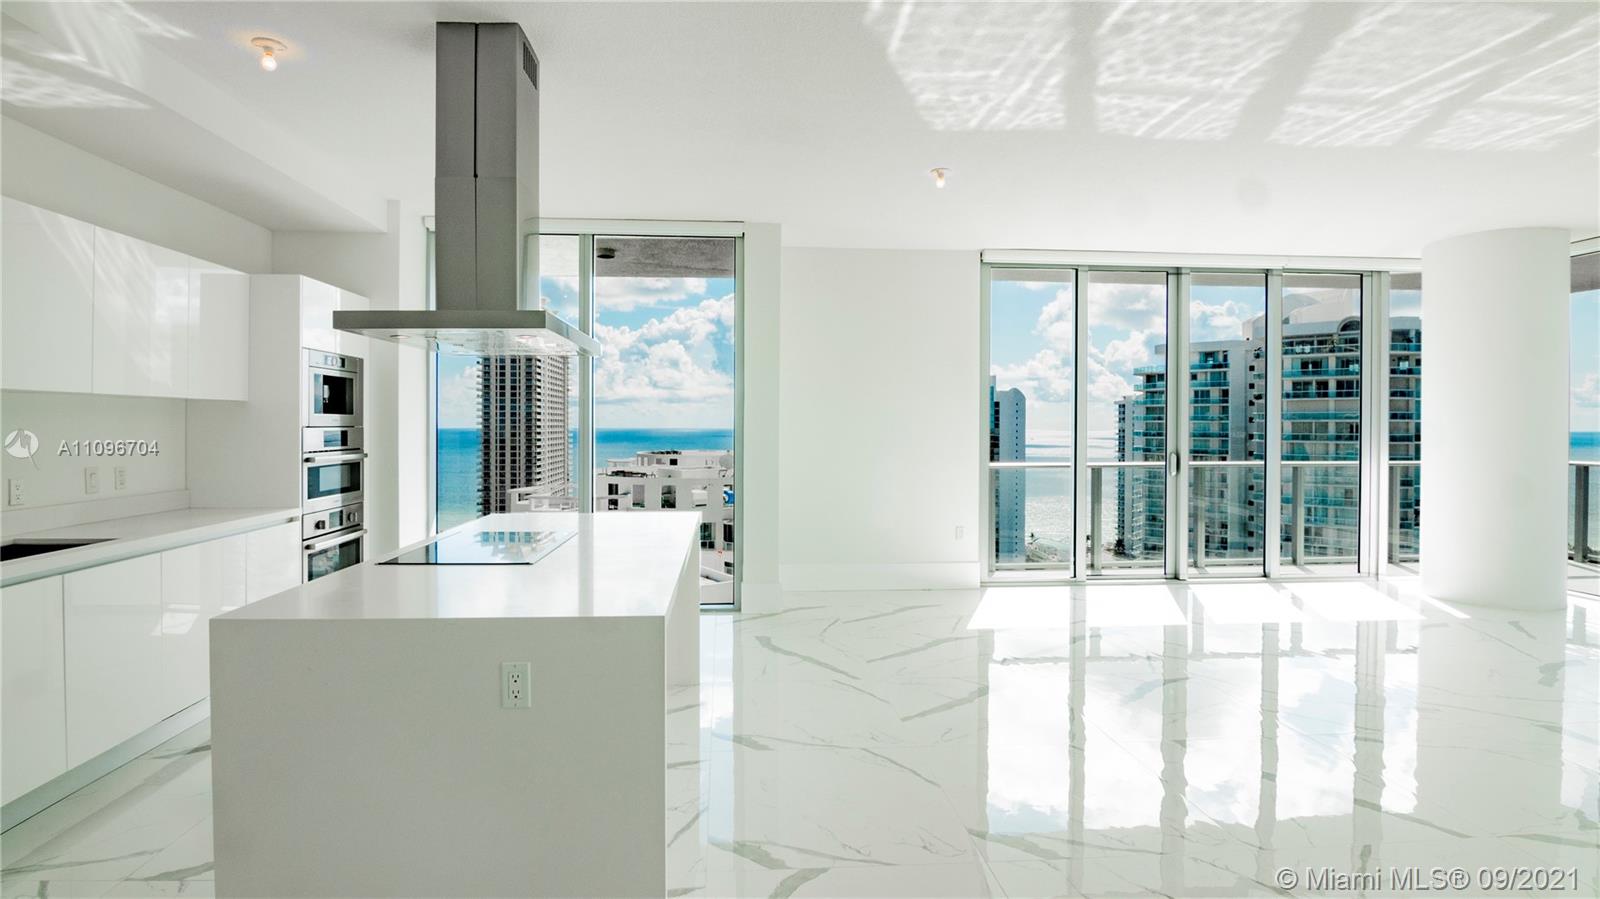 a large white kitchen with granite countertop a large window